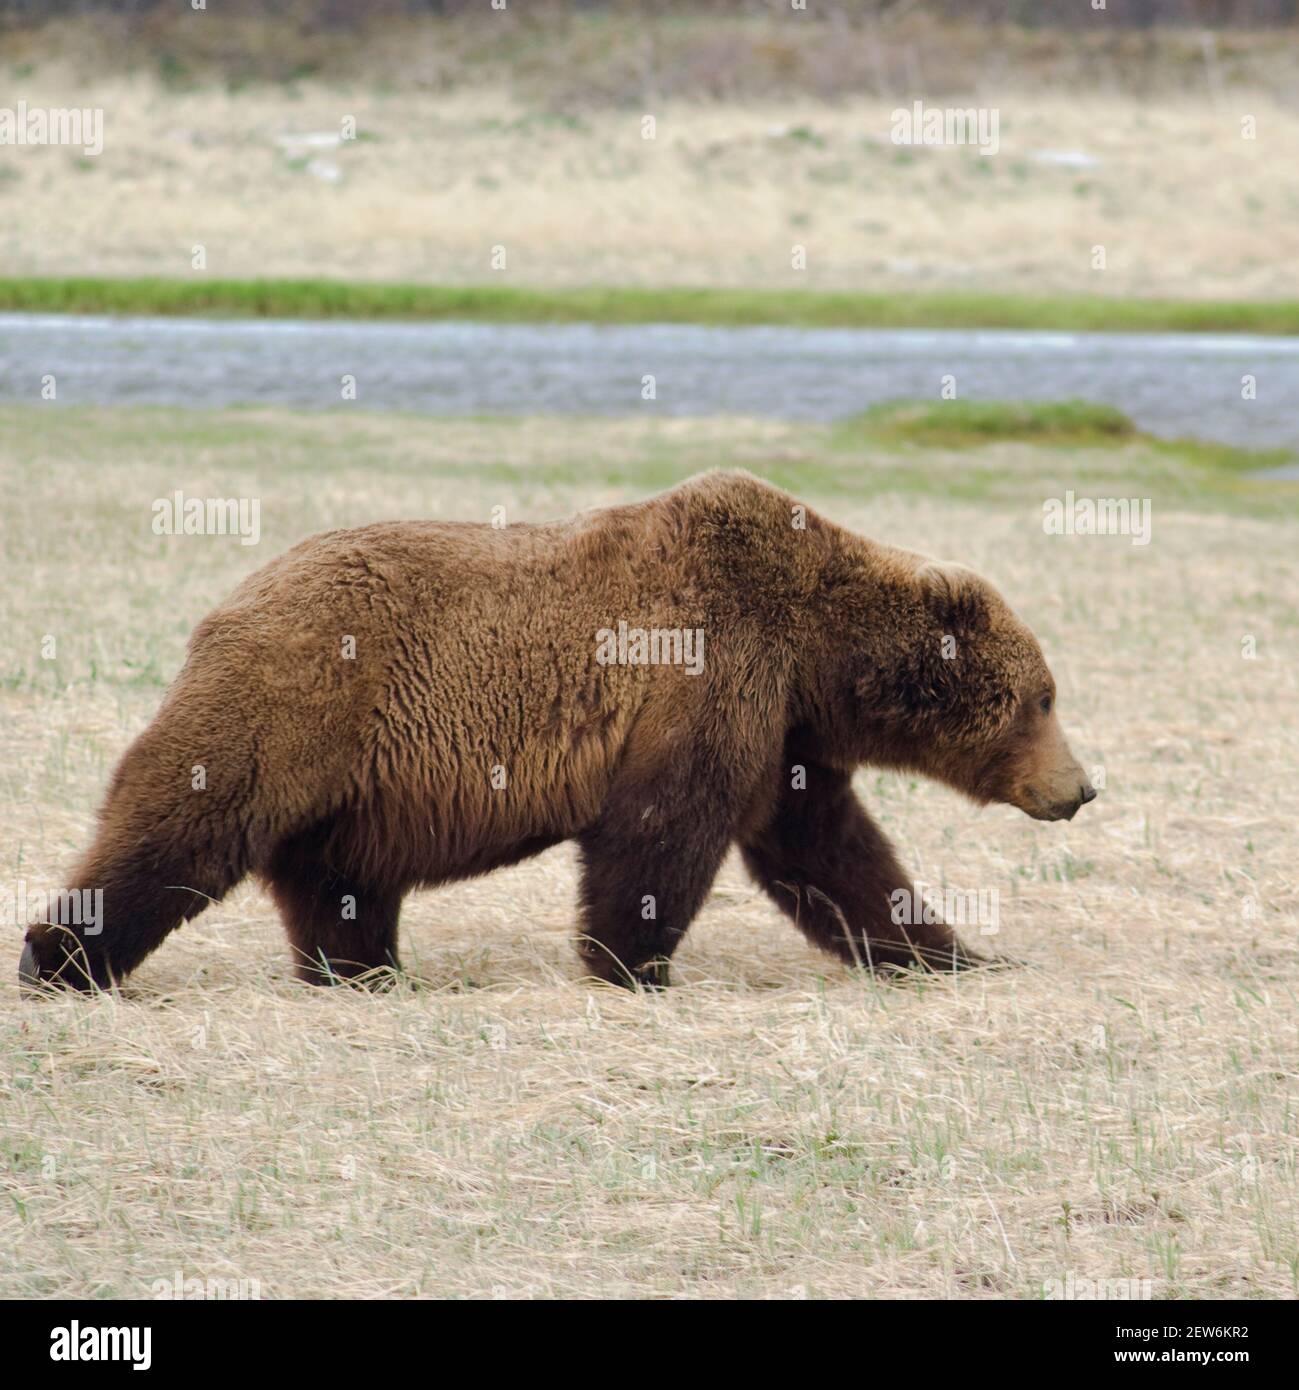 An Alaskan brown bear, Ursus Arctos Gyas, prowls threw a sedge grass meadow in front of small stream up on the Alaskan Peninsula Stock Photo